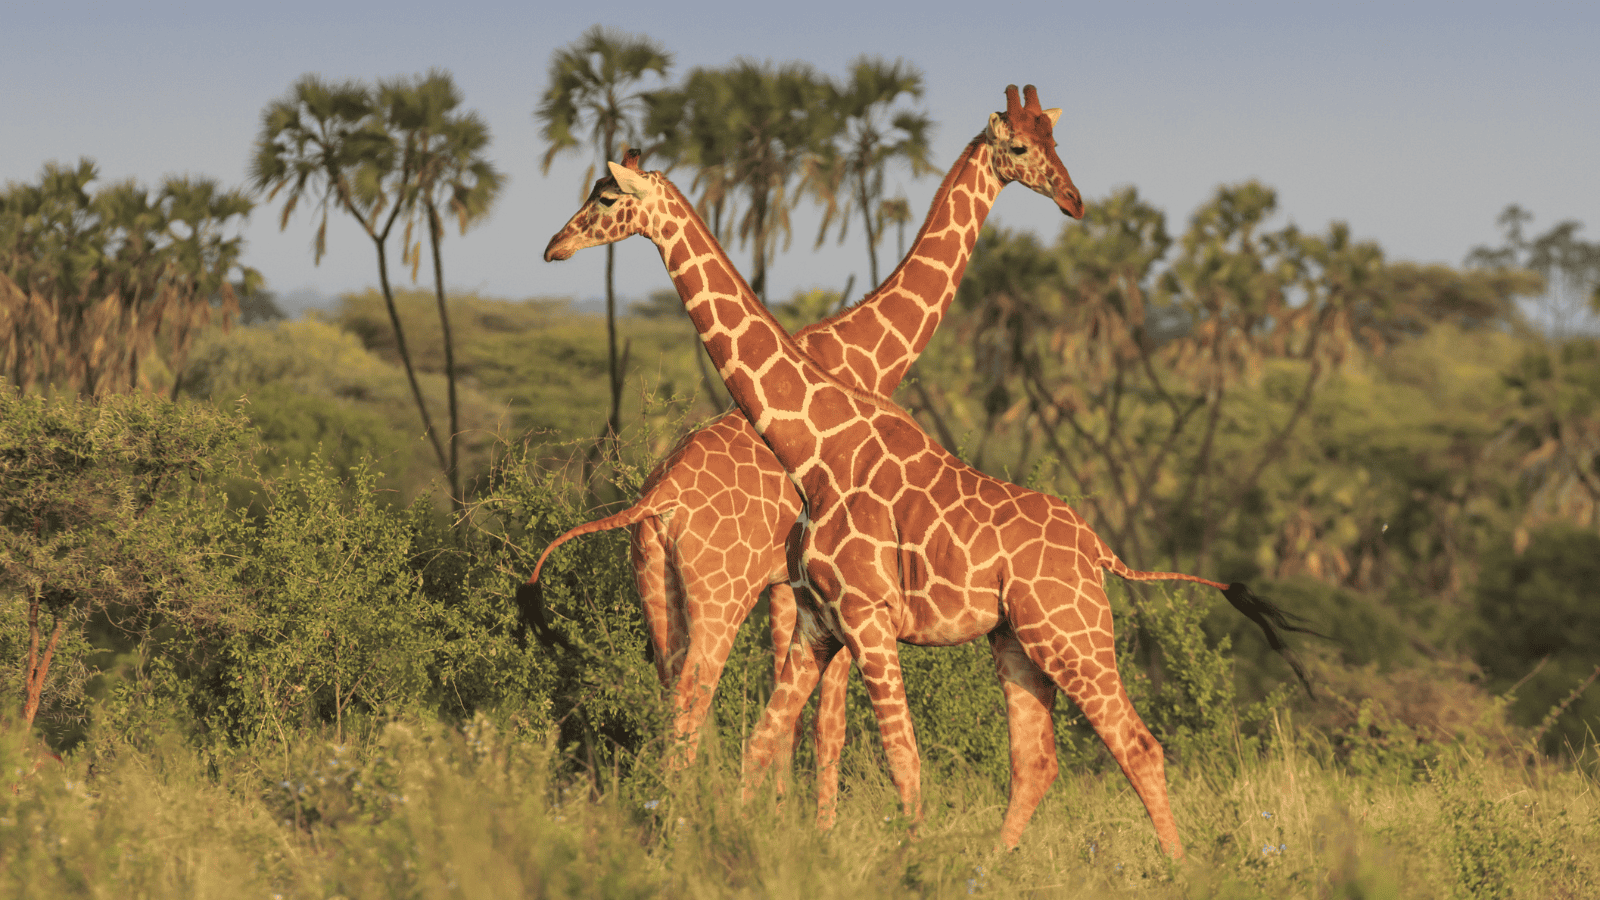 <p>Savor the African wilderness without sacrificing luxury on an 8-day <a href="https://skysafari.com/kenya/kenya-8-day-safari/" rel="nofollow external noopener noreferrer">SkySafari</a> excursion. For eight days, guests are immersed in picturesque scenery and exhilarating activities. </p><p>The safari lets you see Africa’s finest views, from Meru National Park to Loisaba. SkySafari specializes in wildlife sightseeing, so expect a memorable vacation.</p>